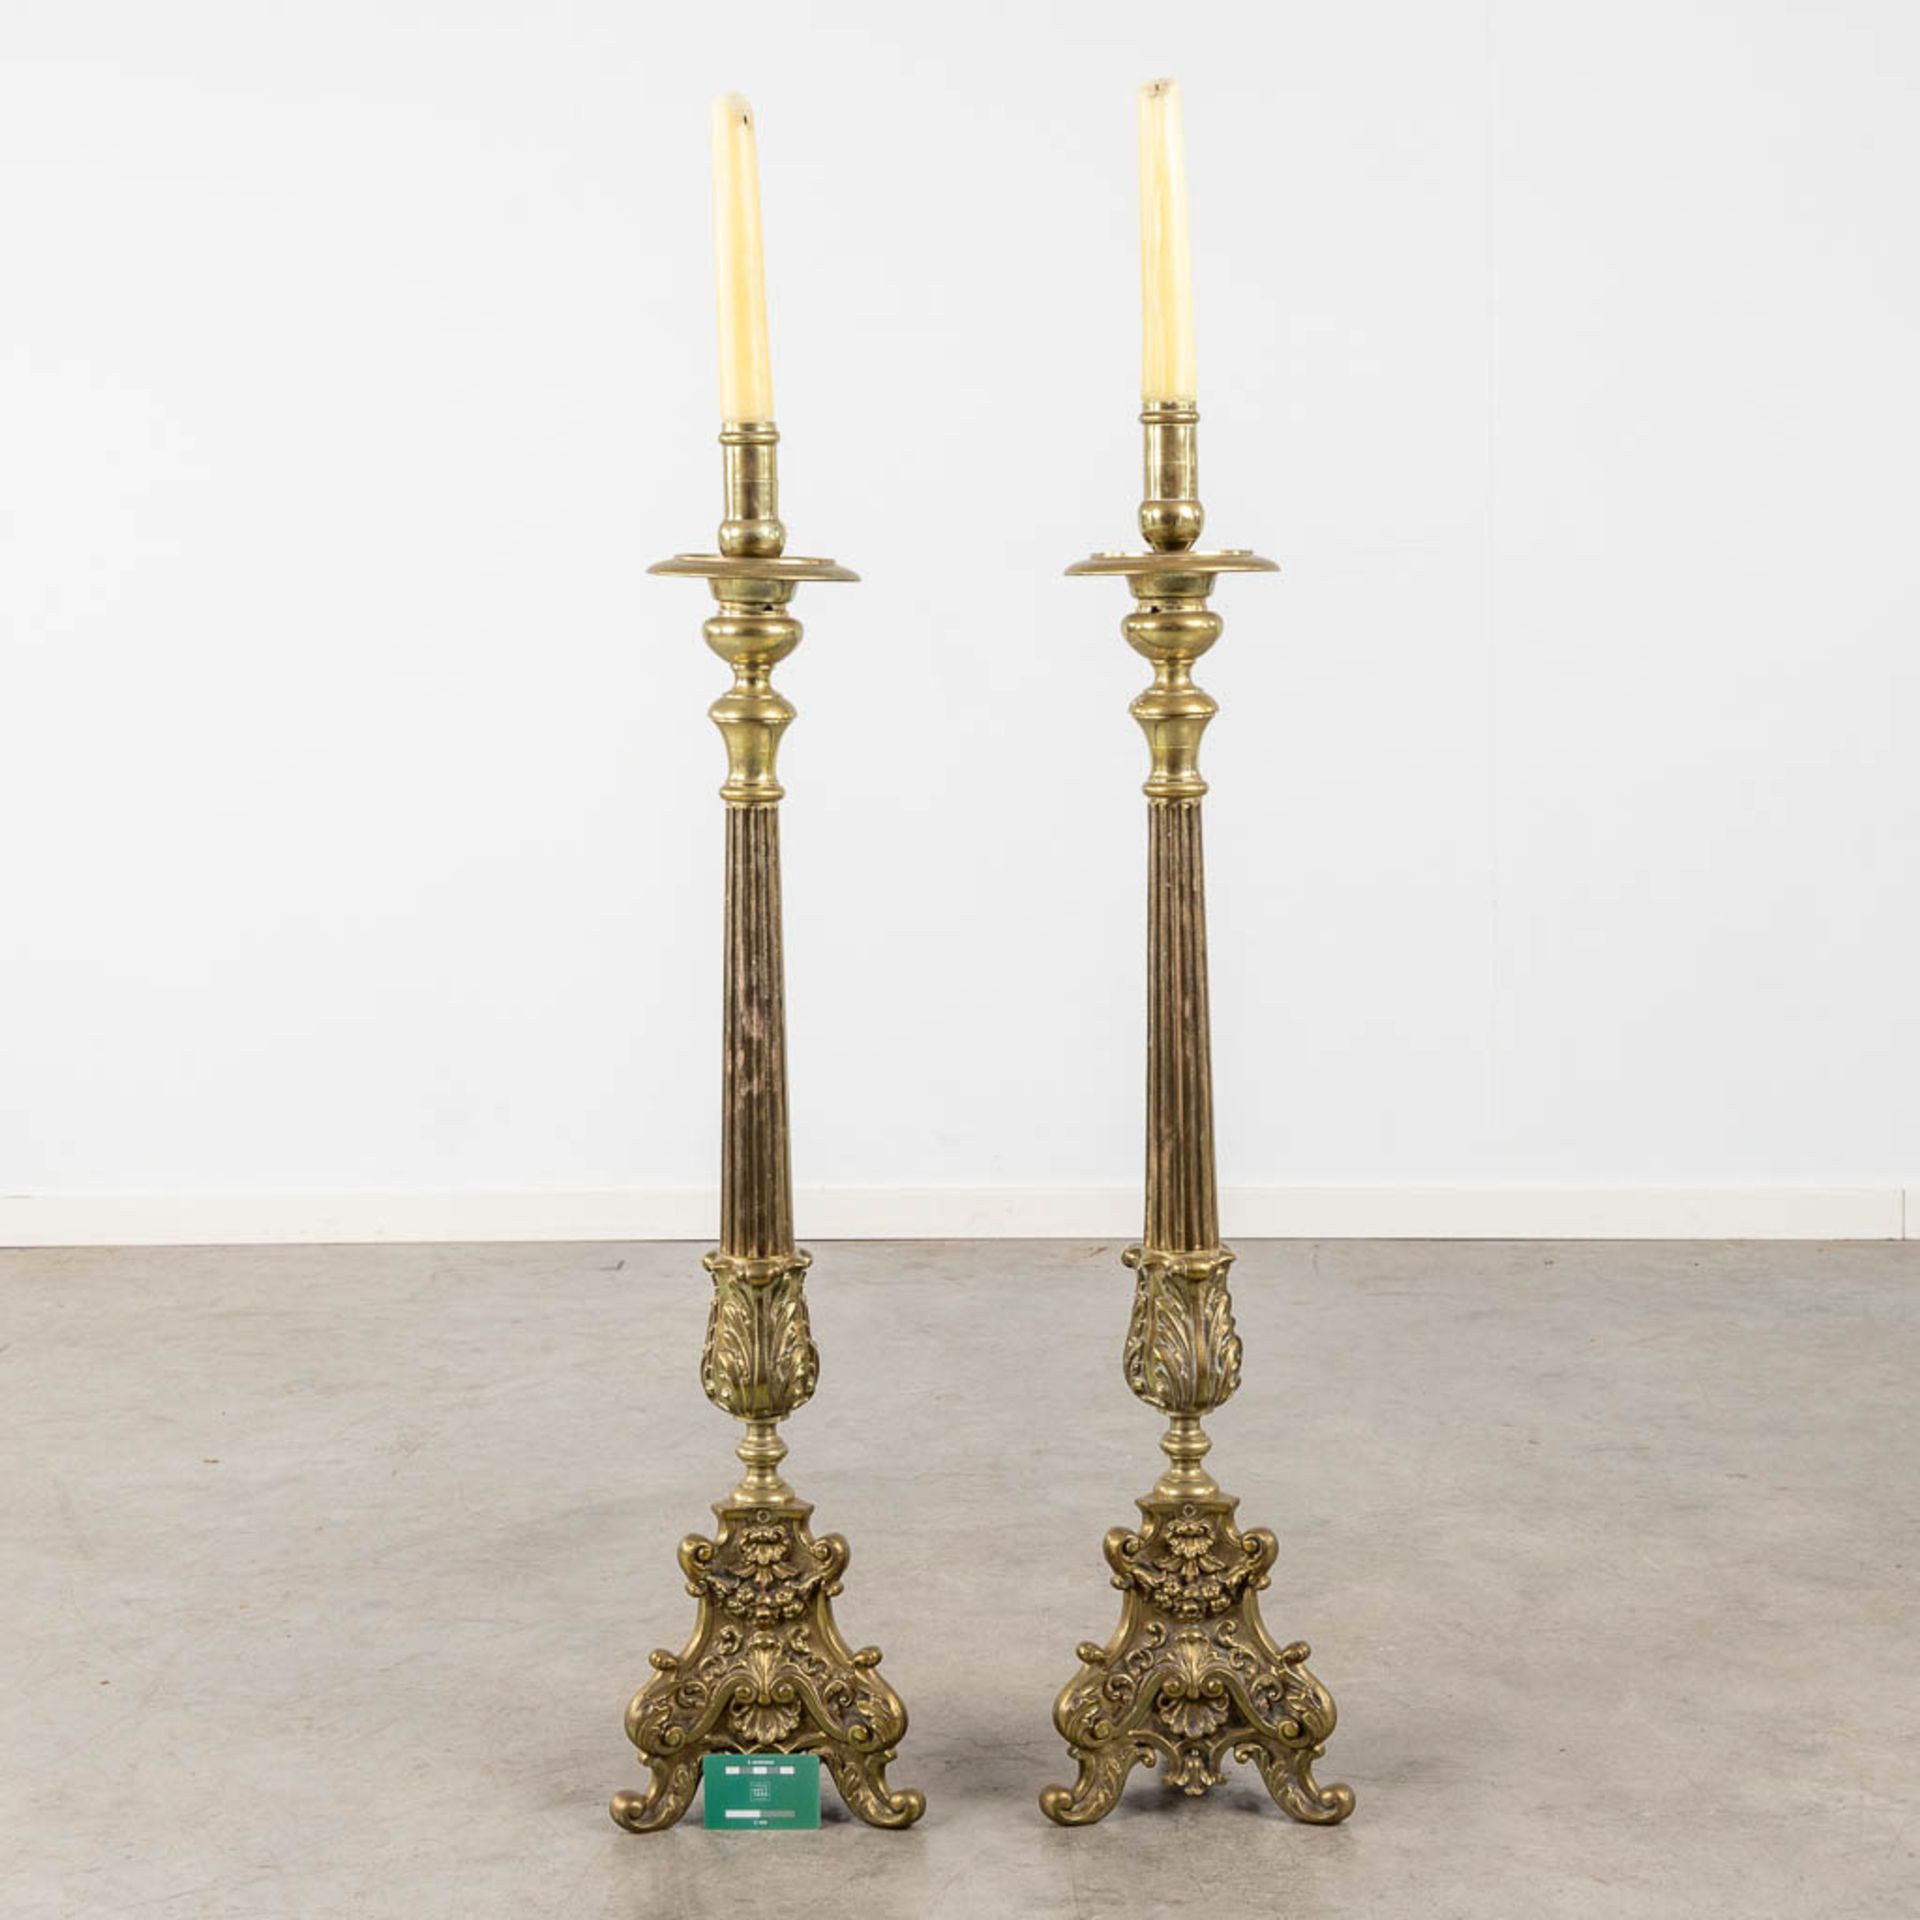 A pair of bronze church candlesticks/candle holders, Louis XV style. Circa 1900. (W:23 x H:105 cm) - Image 2 of 19